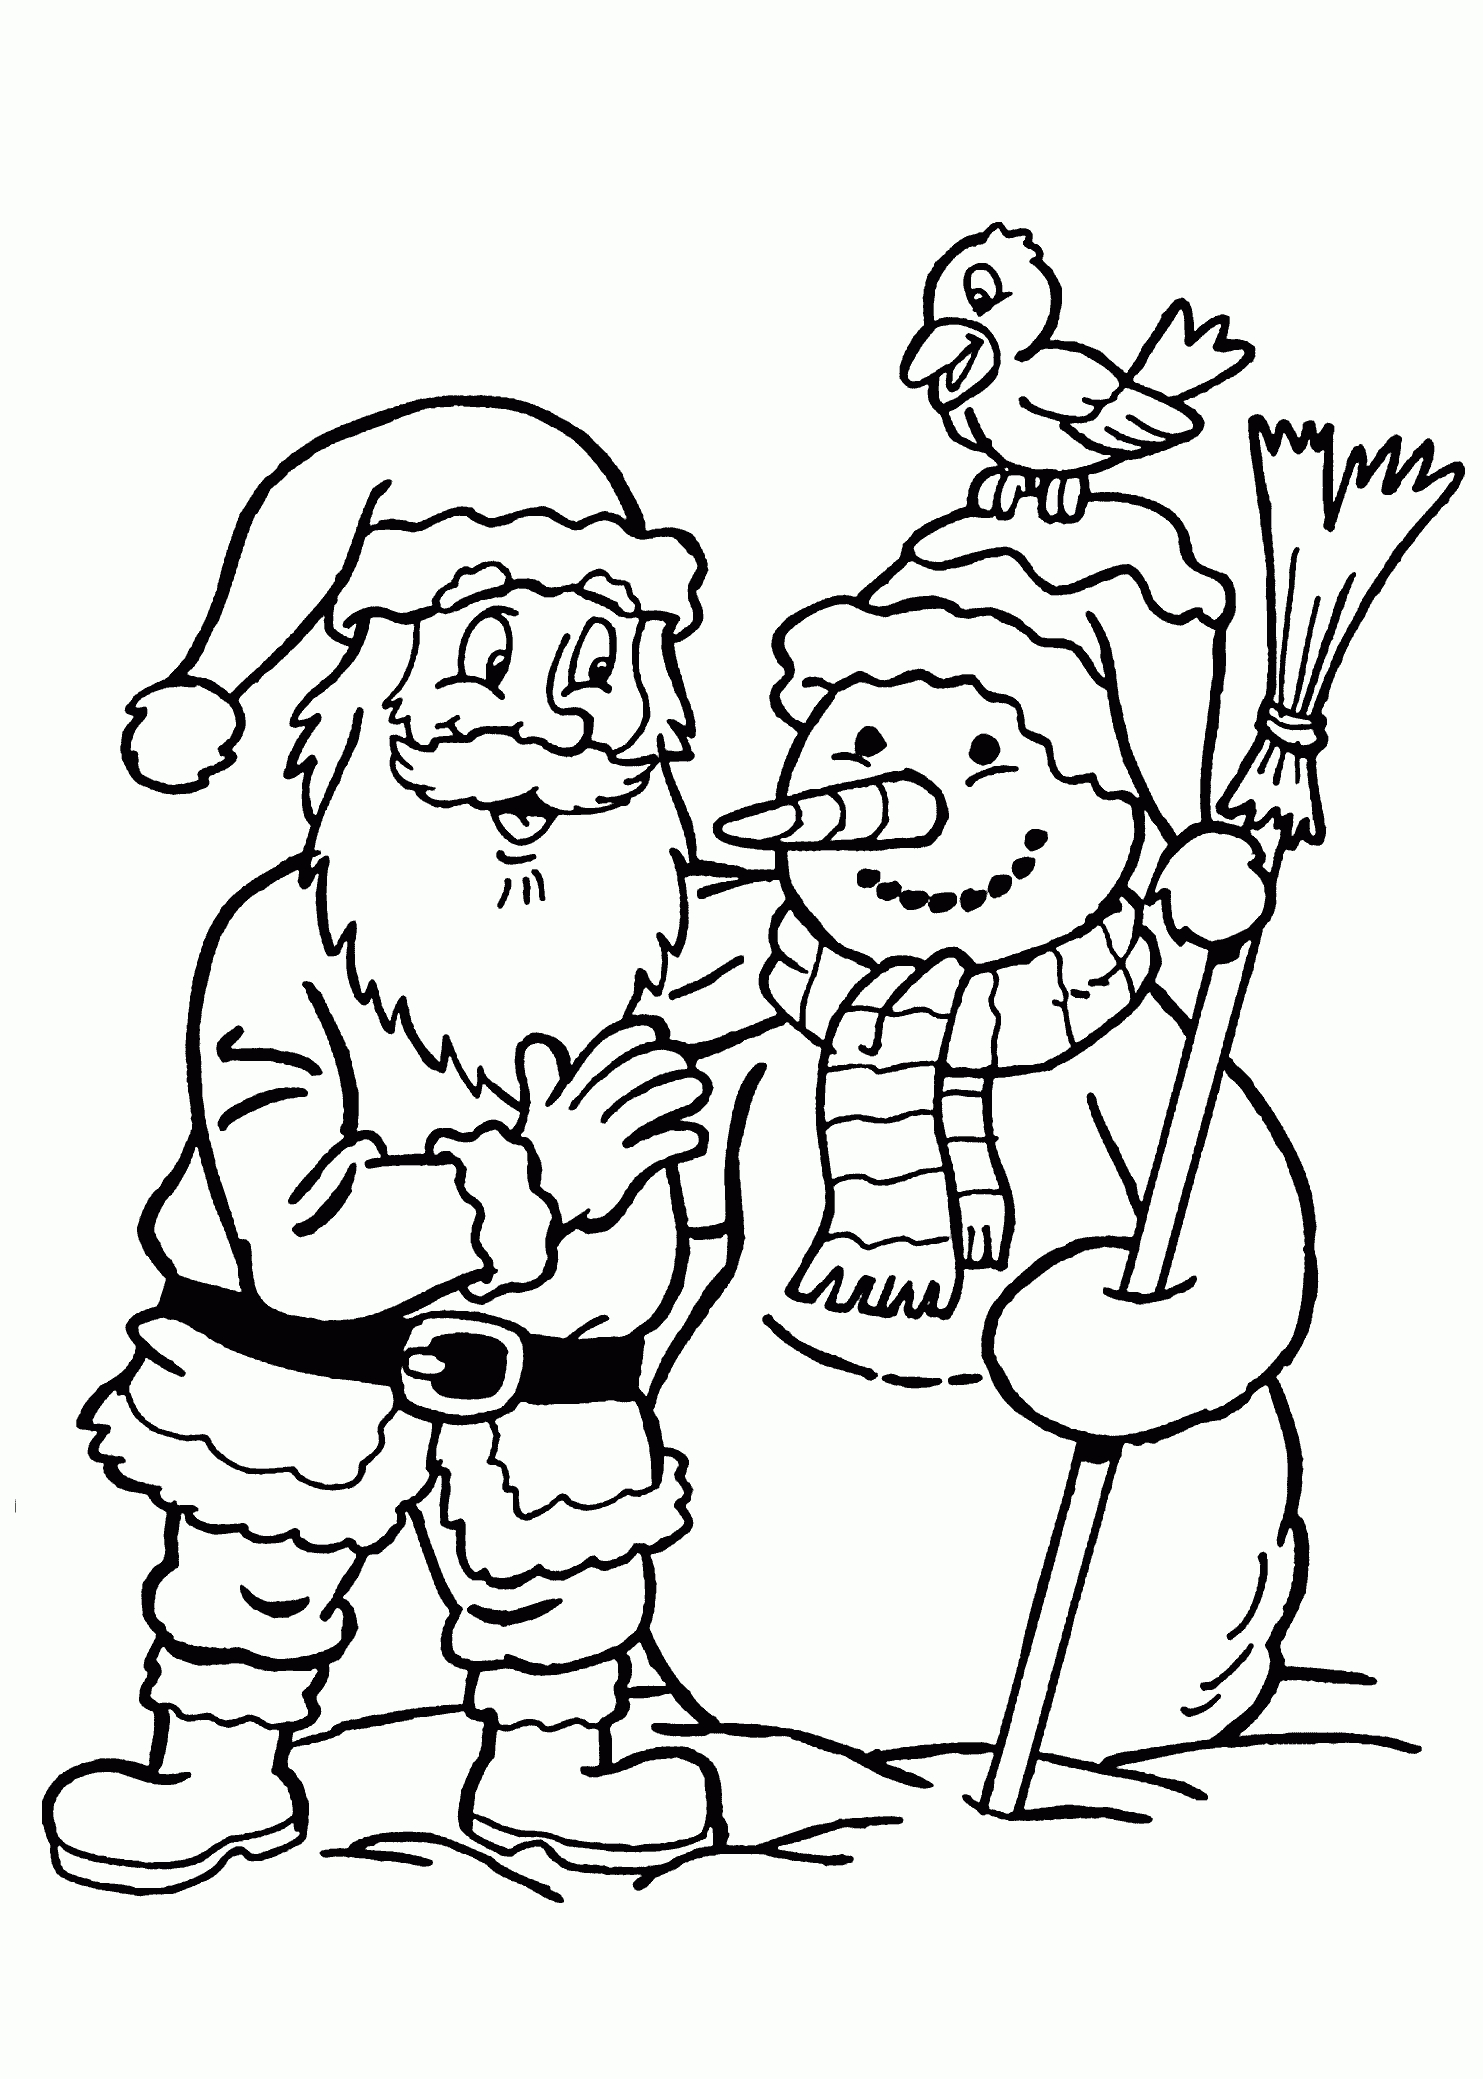 Santa Claus And Snowman Coloring Pages For Kids, Printable Free - Santa Coloring Pages Printable Free